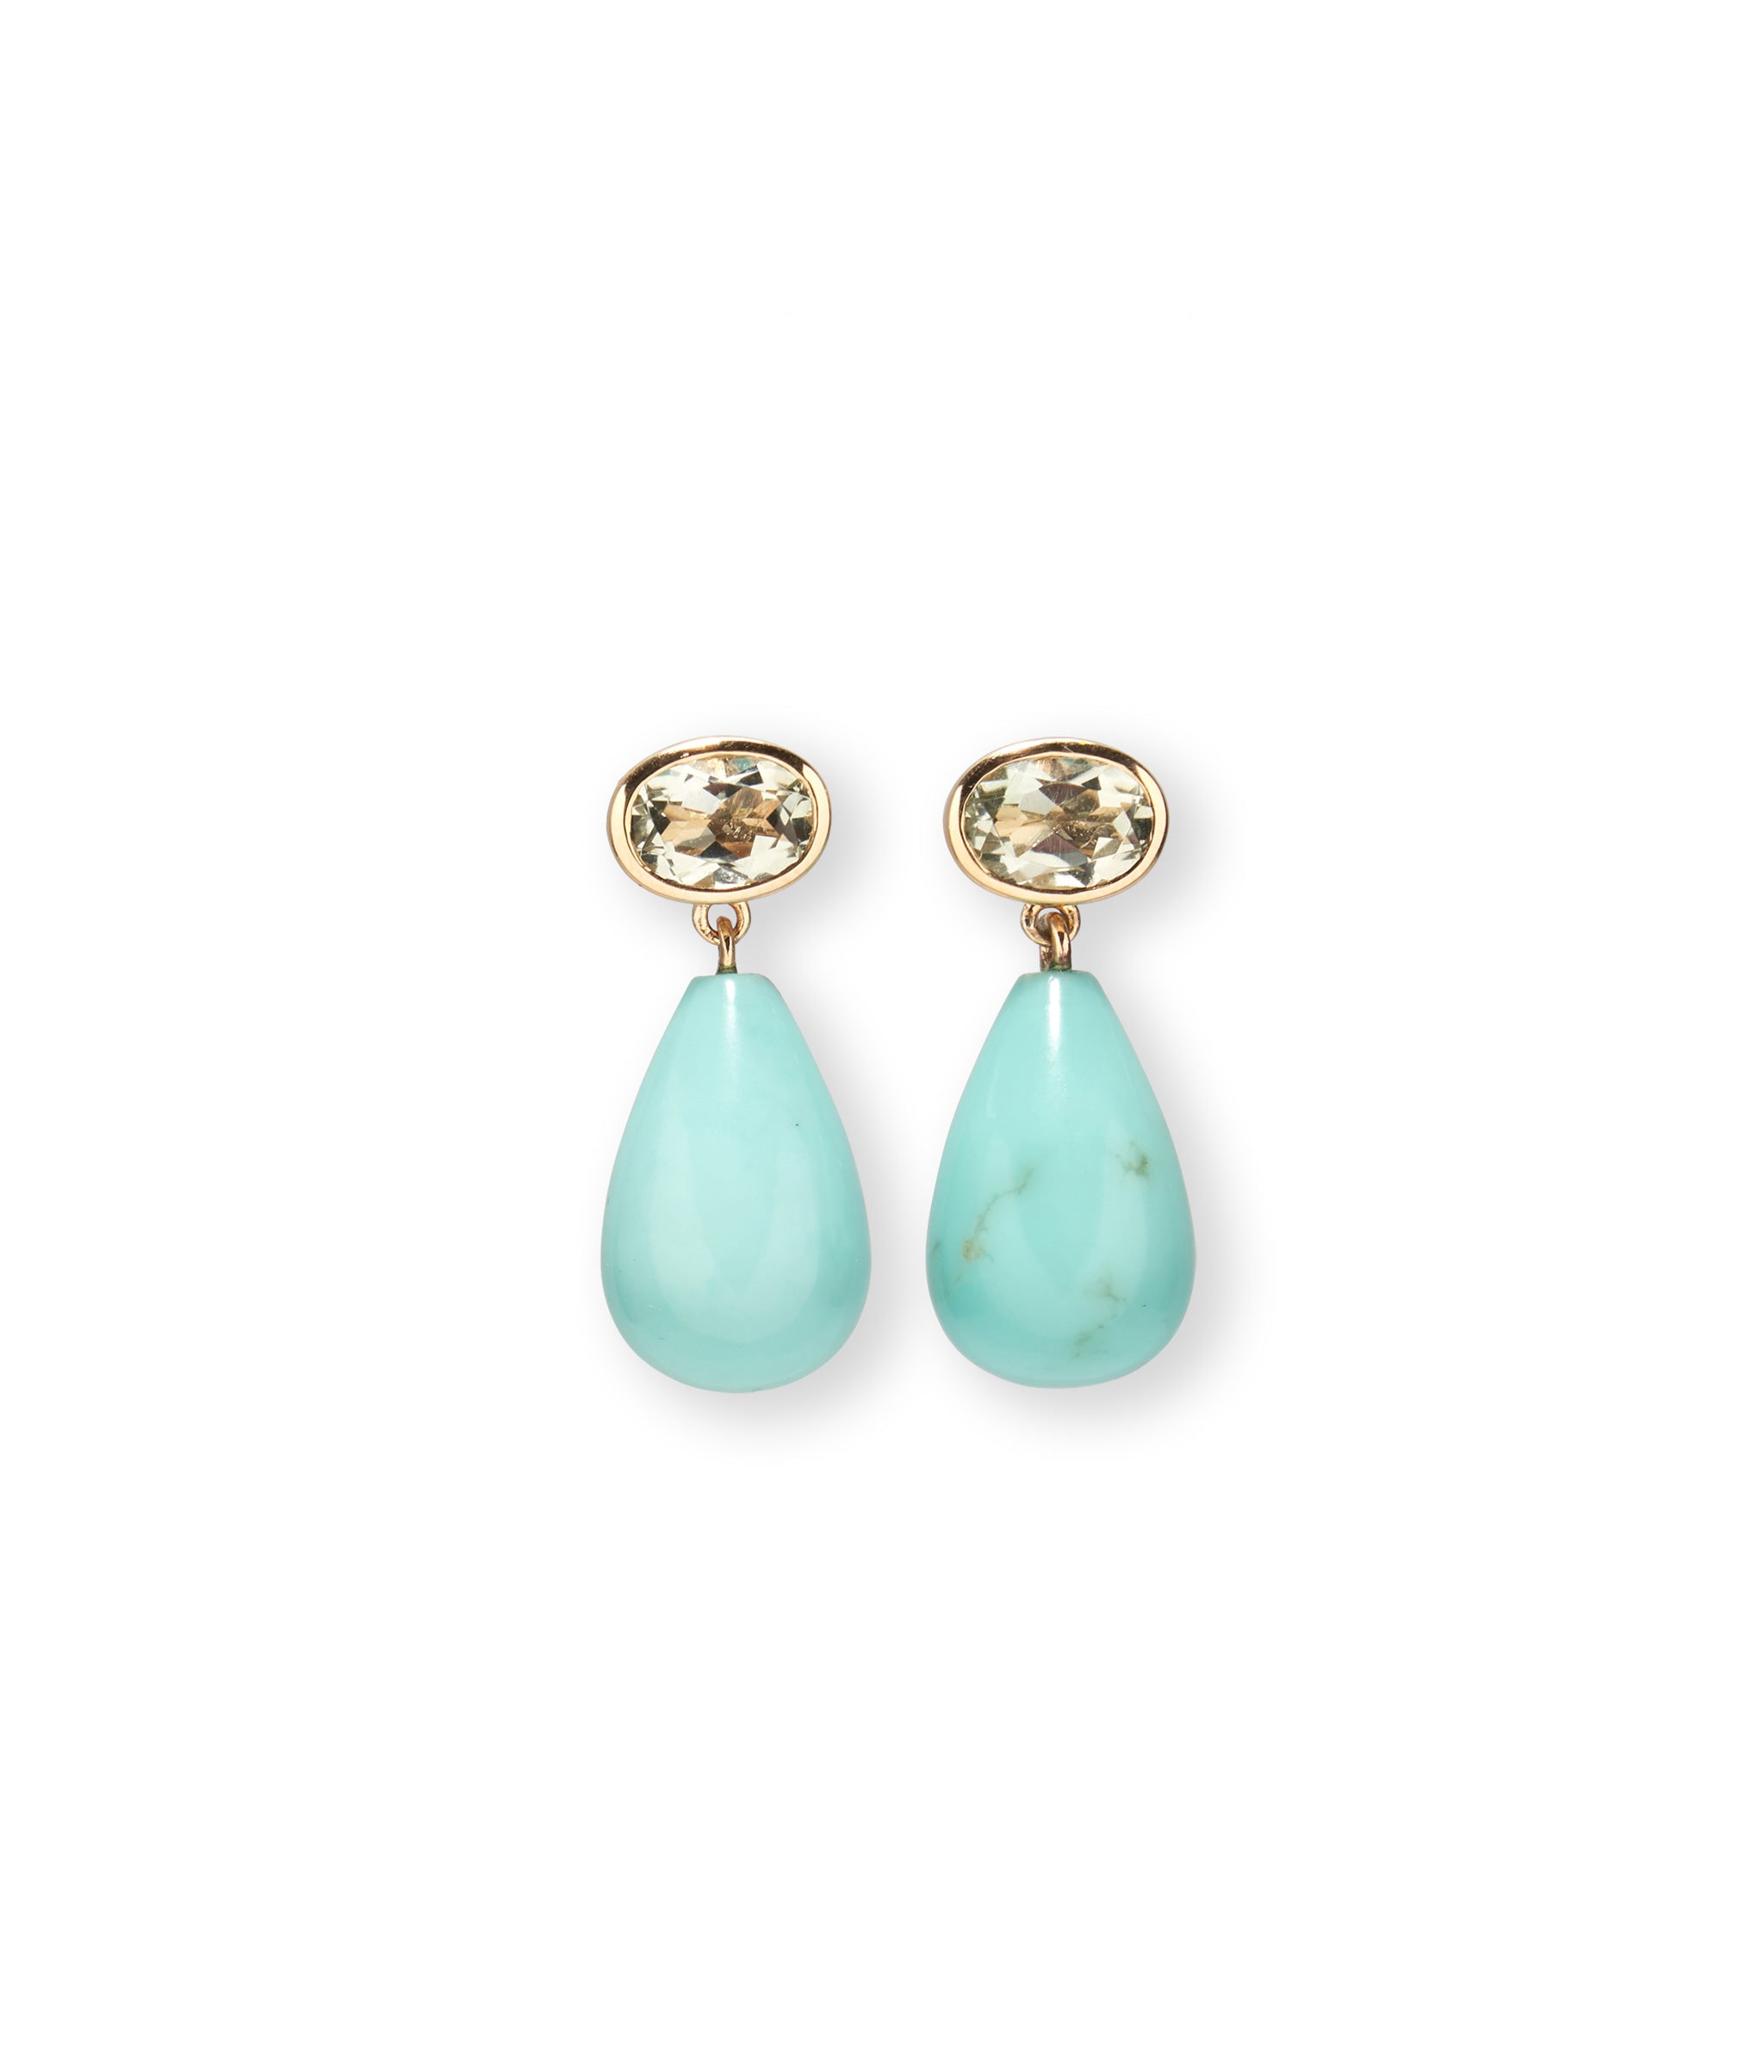 14k Gold Drop Earrings in Green Amethyst & Amazonite. Faceted green amethyst tops and hanging amazonite stone drops.